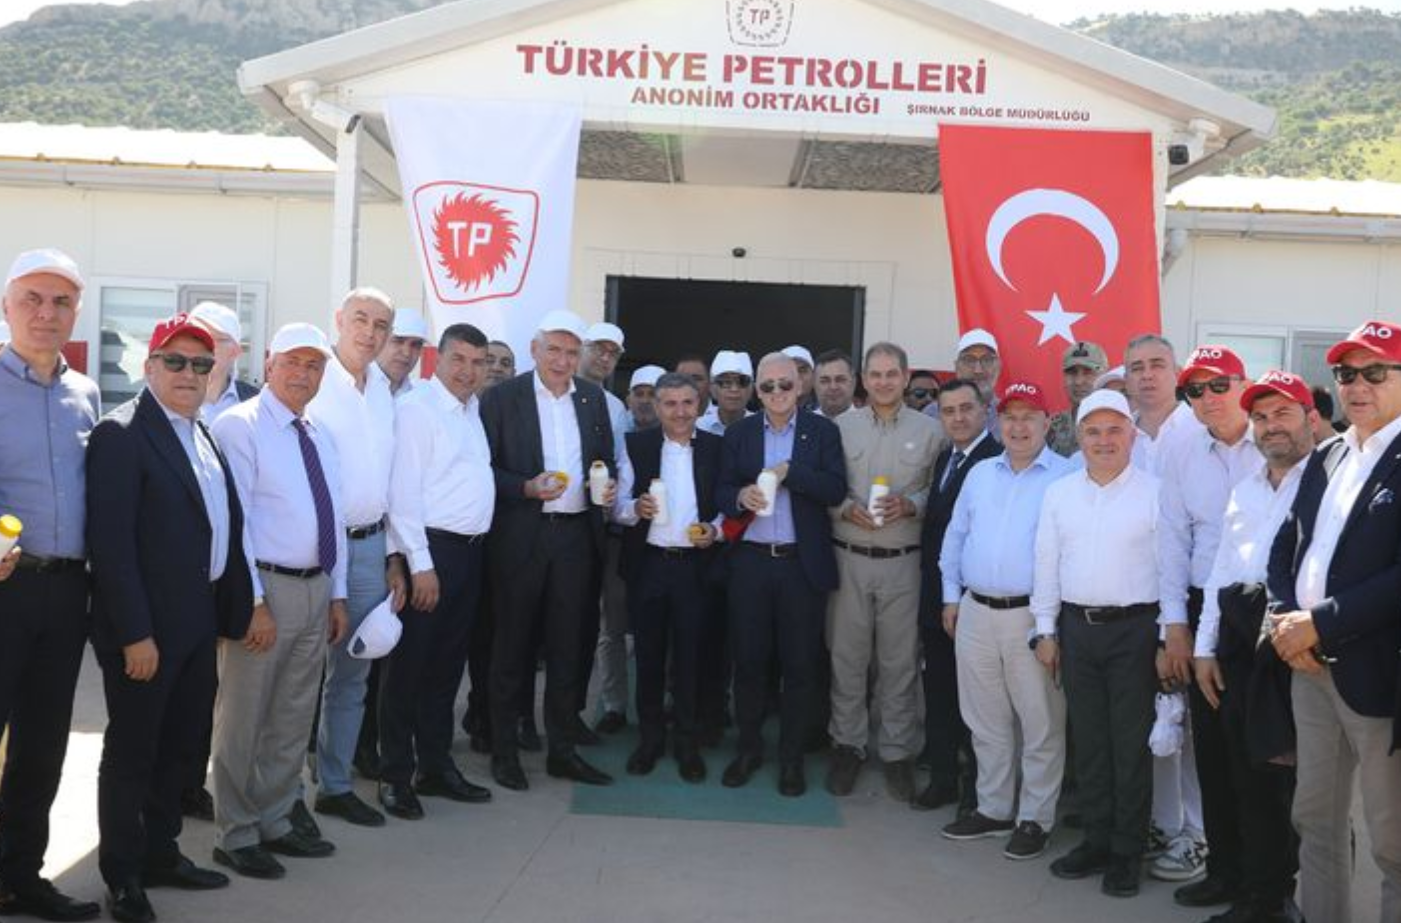 Türkiye's oil discovery offers potential solution to current account deficit 